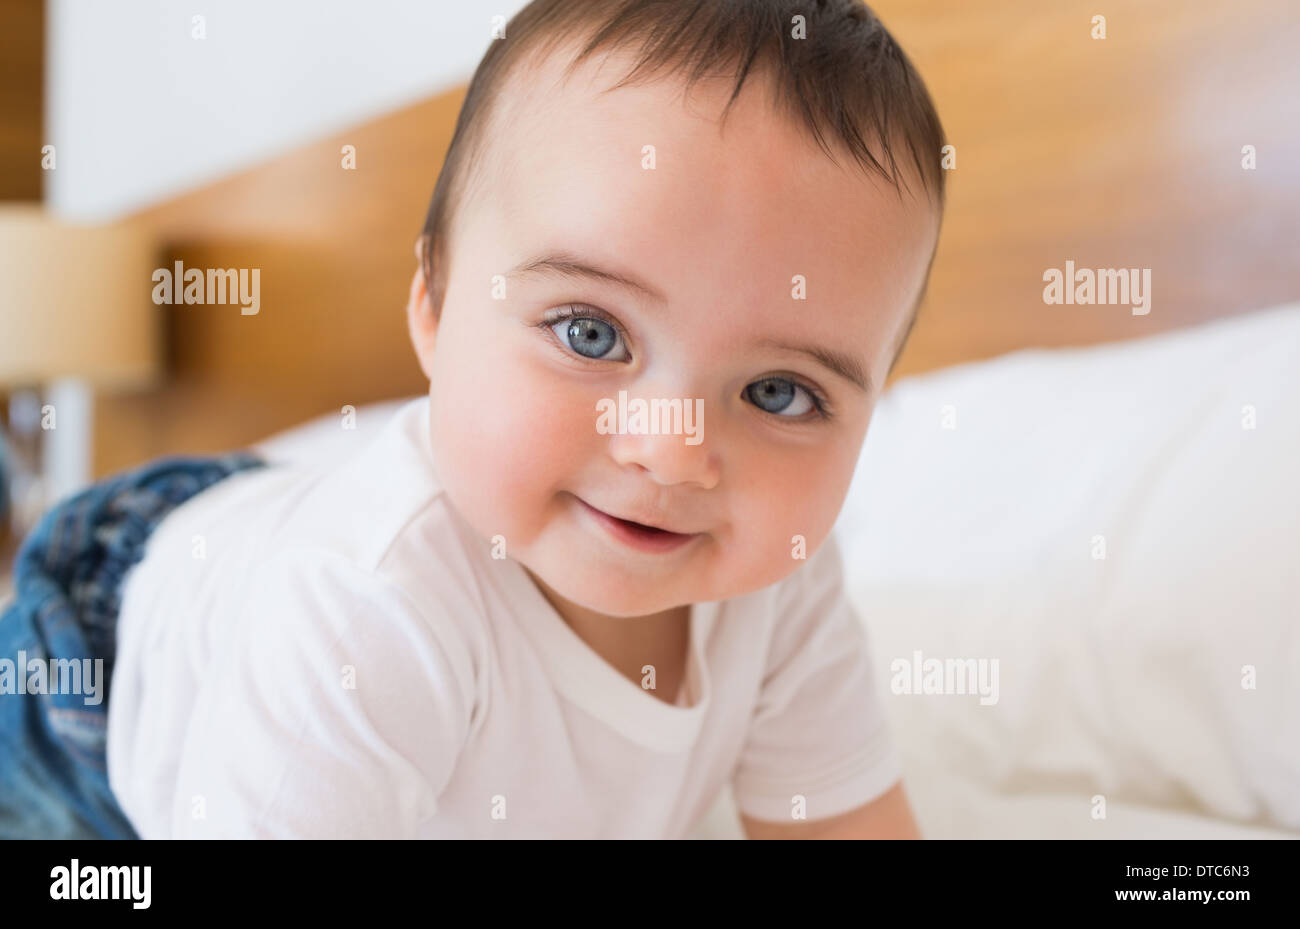 Smiling baby boy in bed Stock Photo